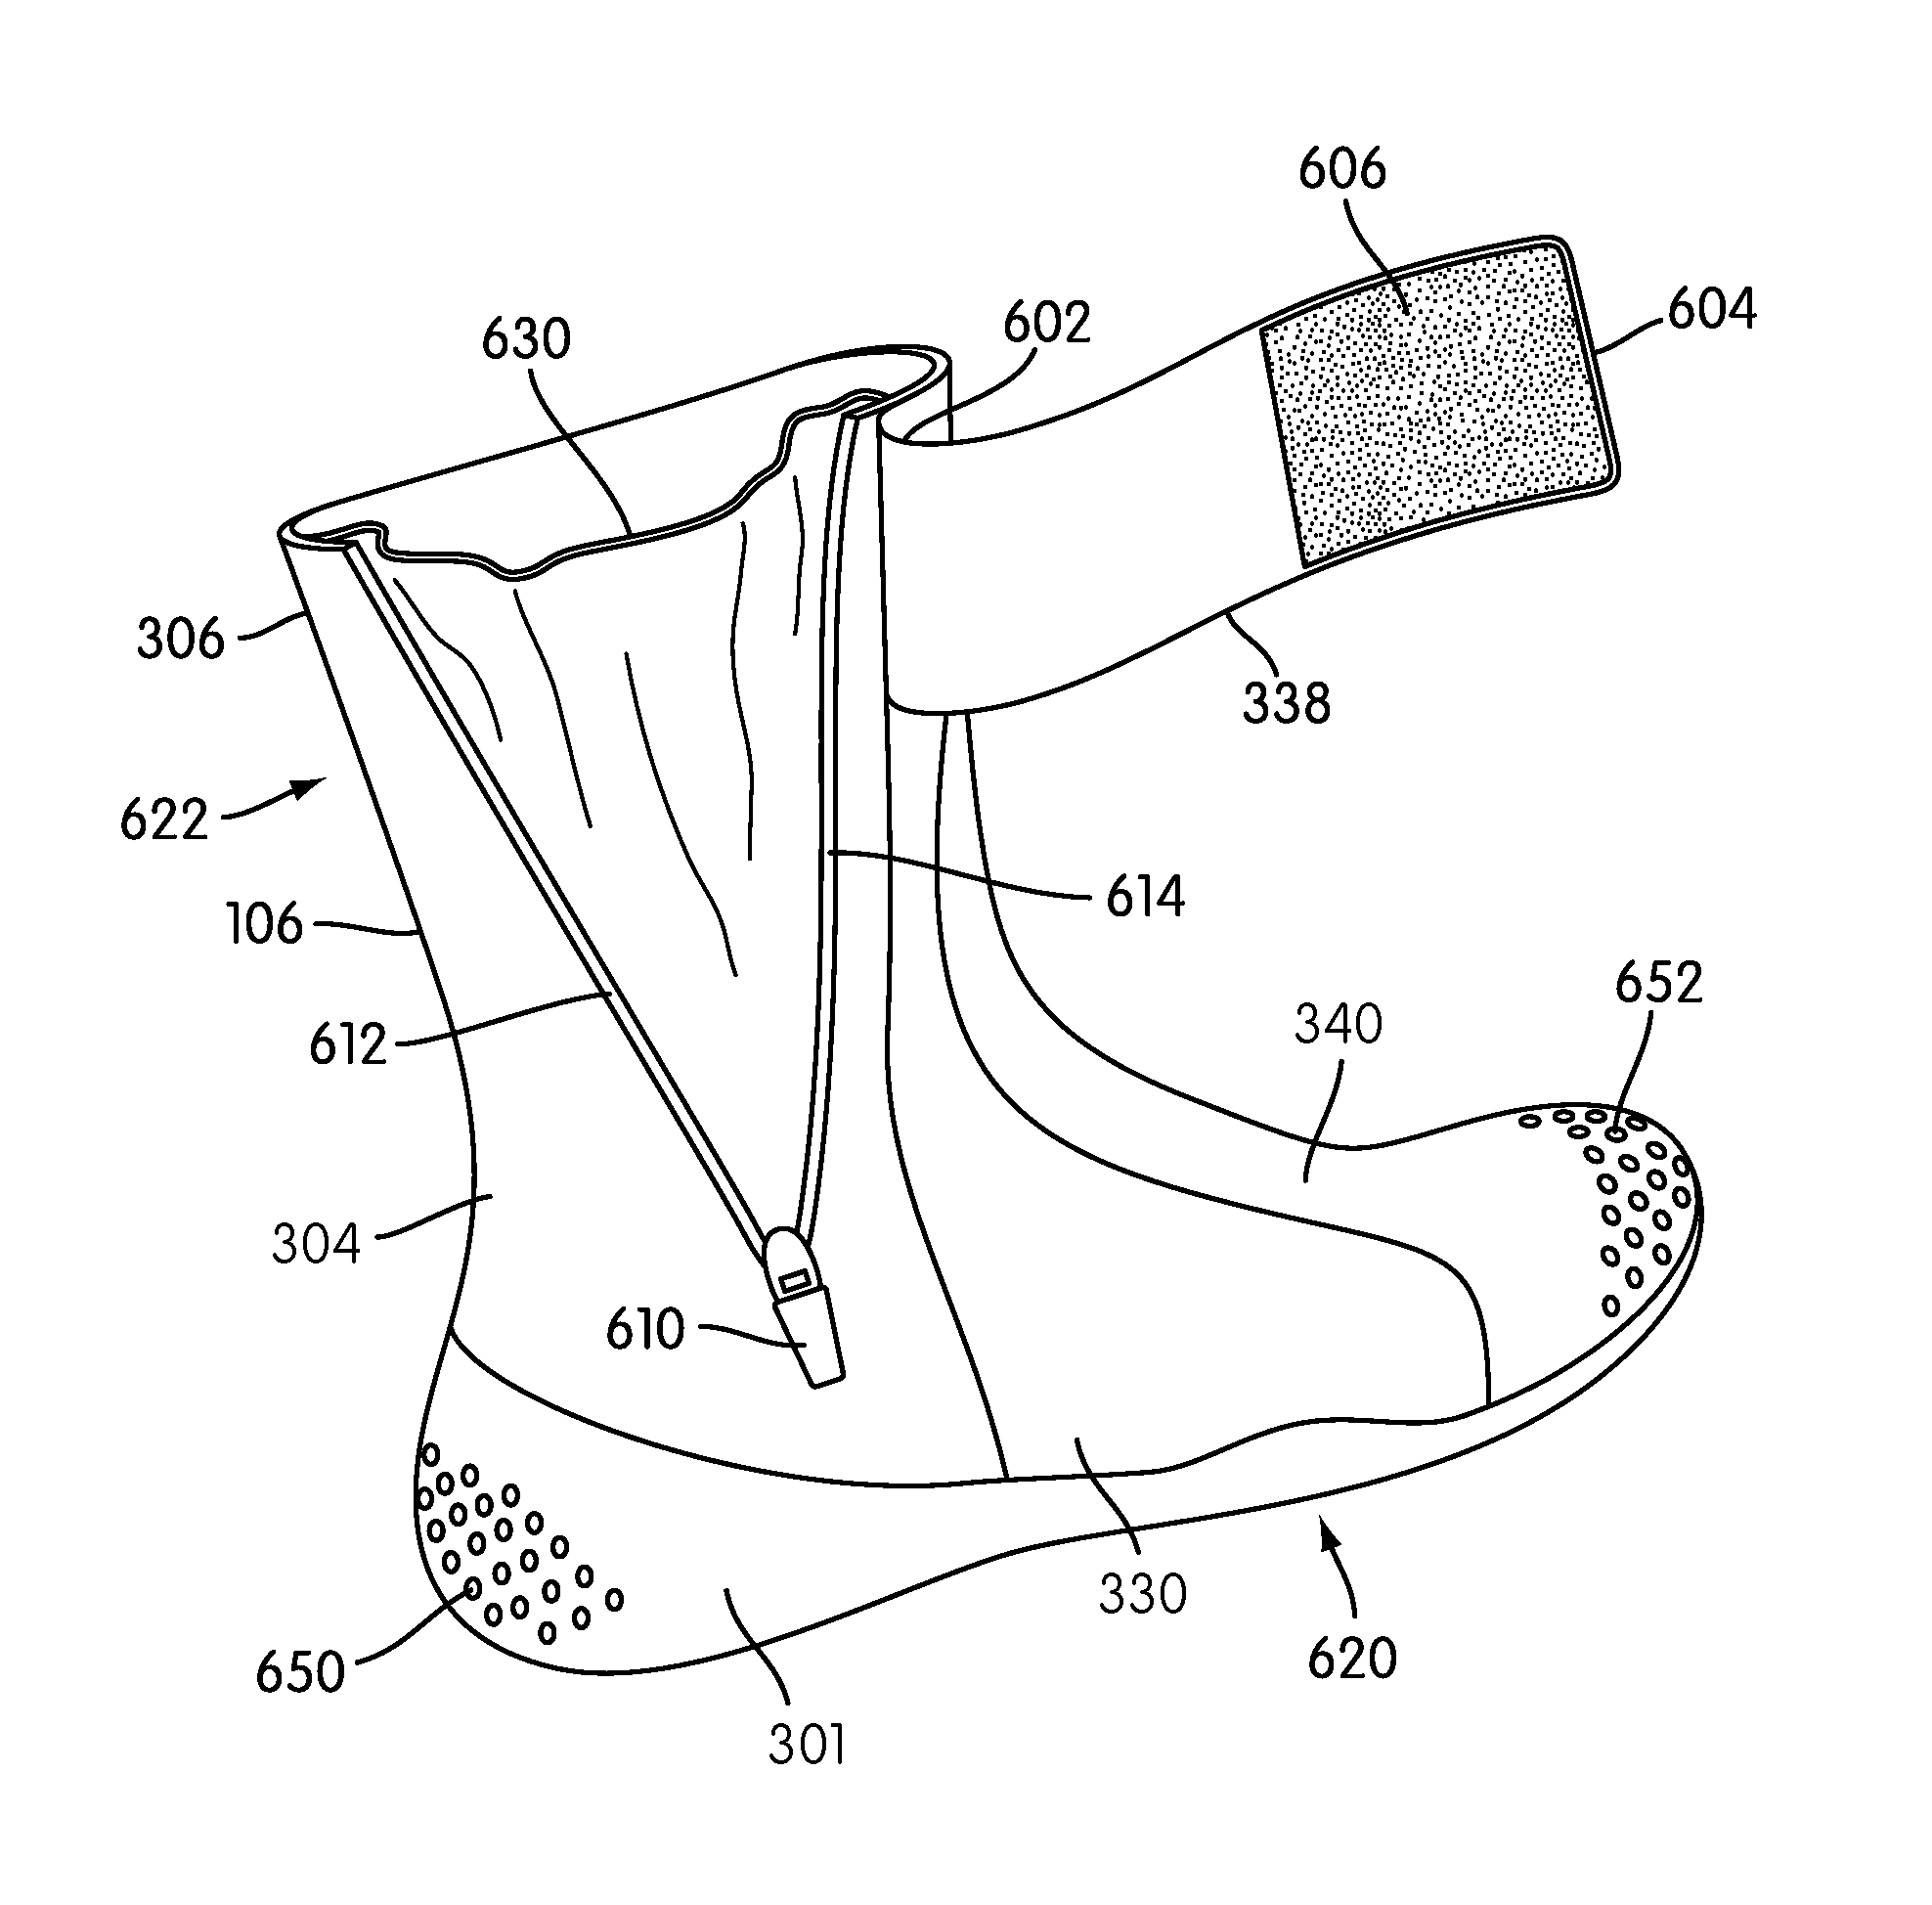 Article of Footwear for Sailing